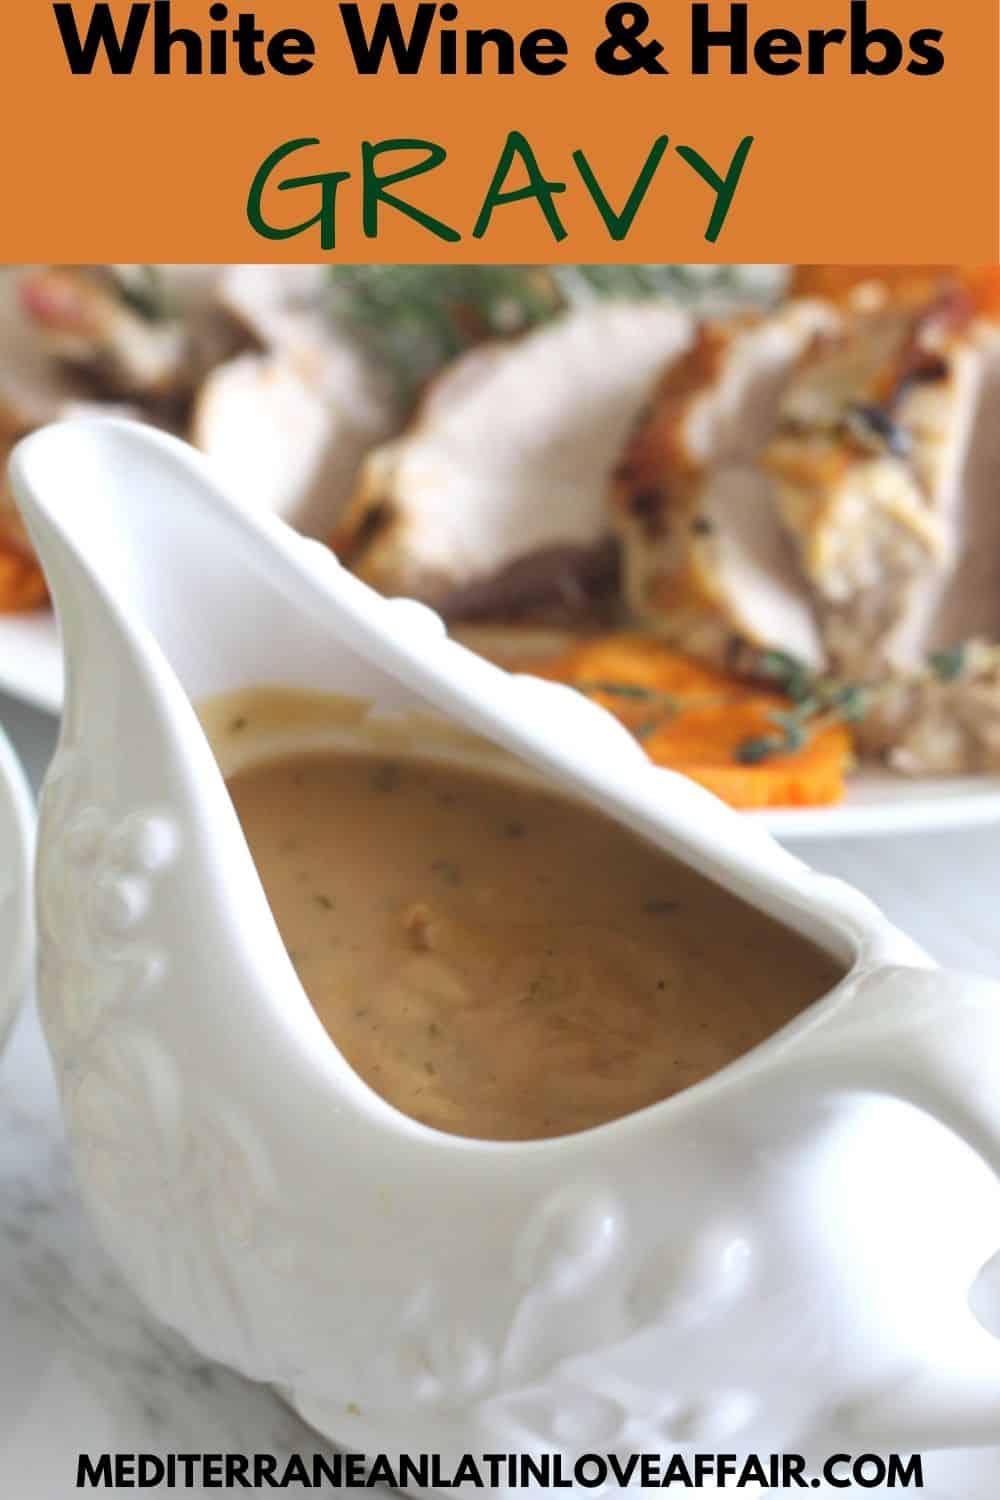 An image prepared for Pinterest. It shows a picture of White Wine Gravy with Herbs, a title bar and the link to the website on the bottom of the image. 